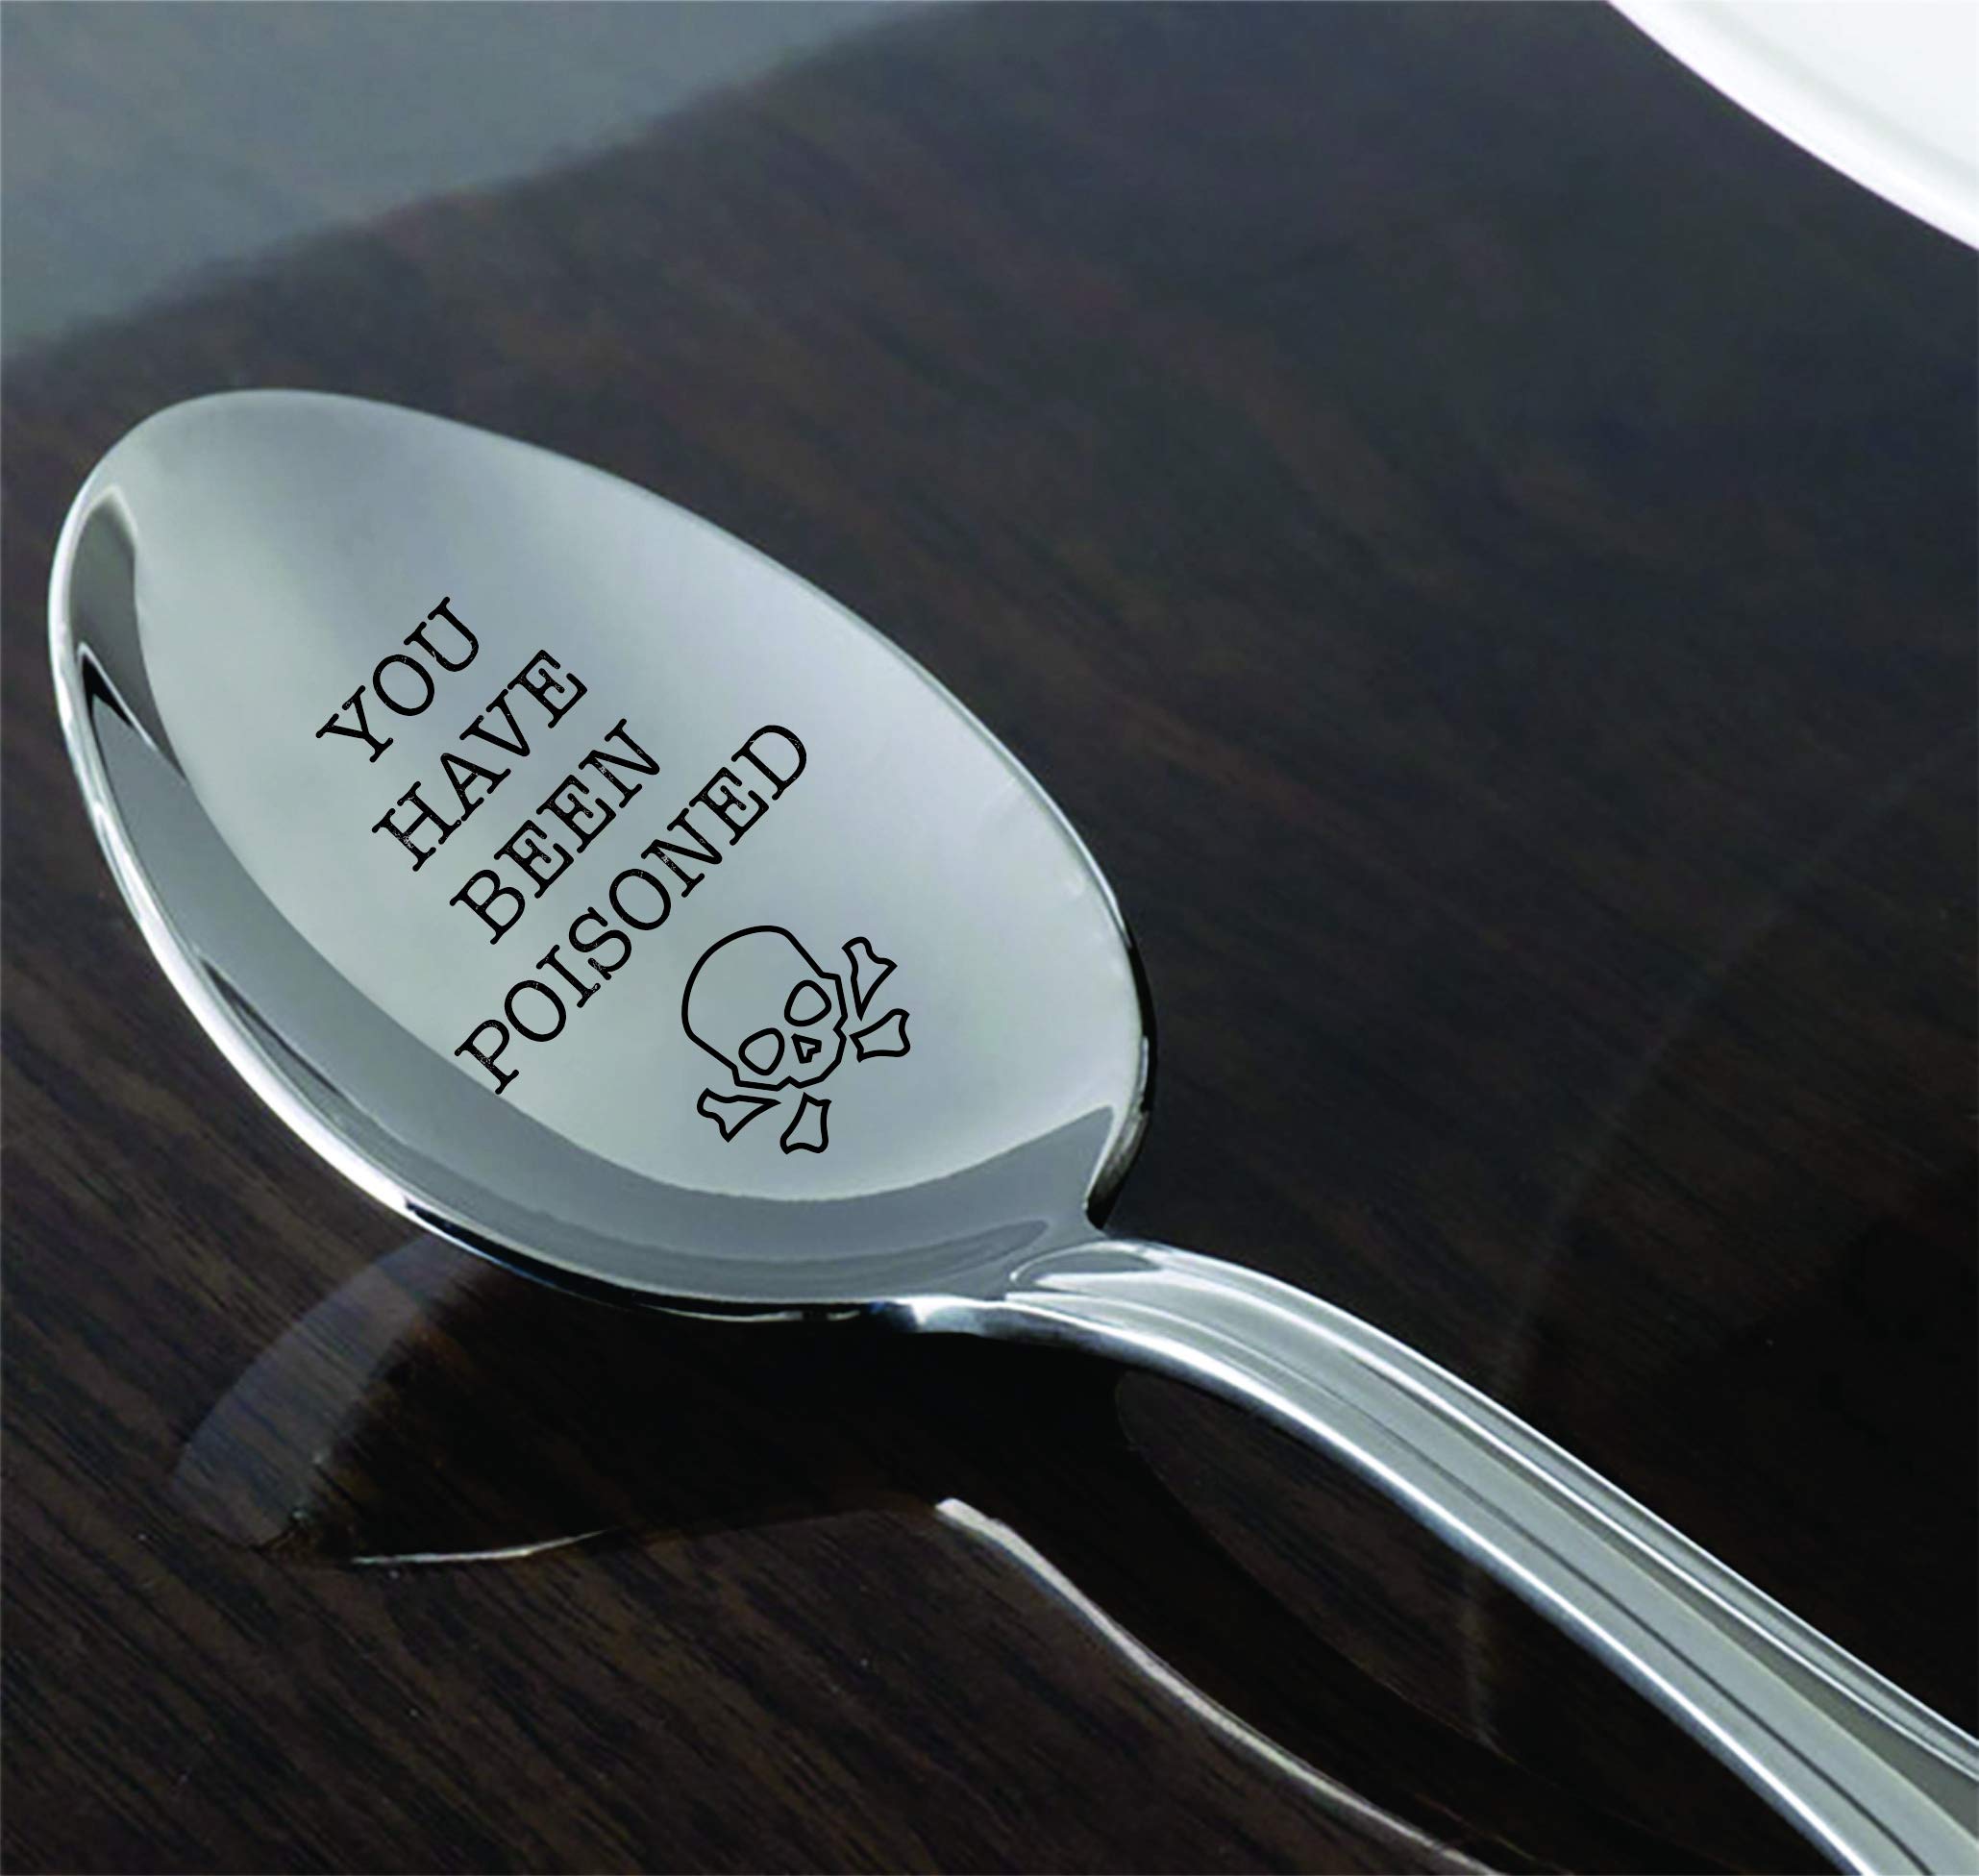 Poison - You Have Been Poisoned - Engraved Spoon - Skull Crossbones Eat at Your Own Risk Funny Spoon Gift - Spoon Gifts - Friends Gifts